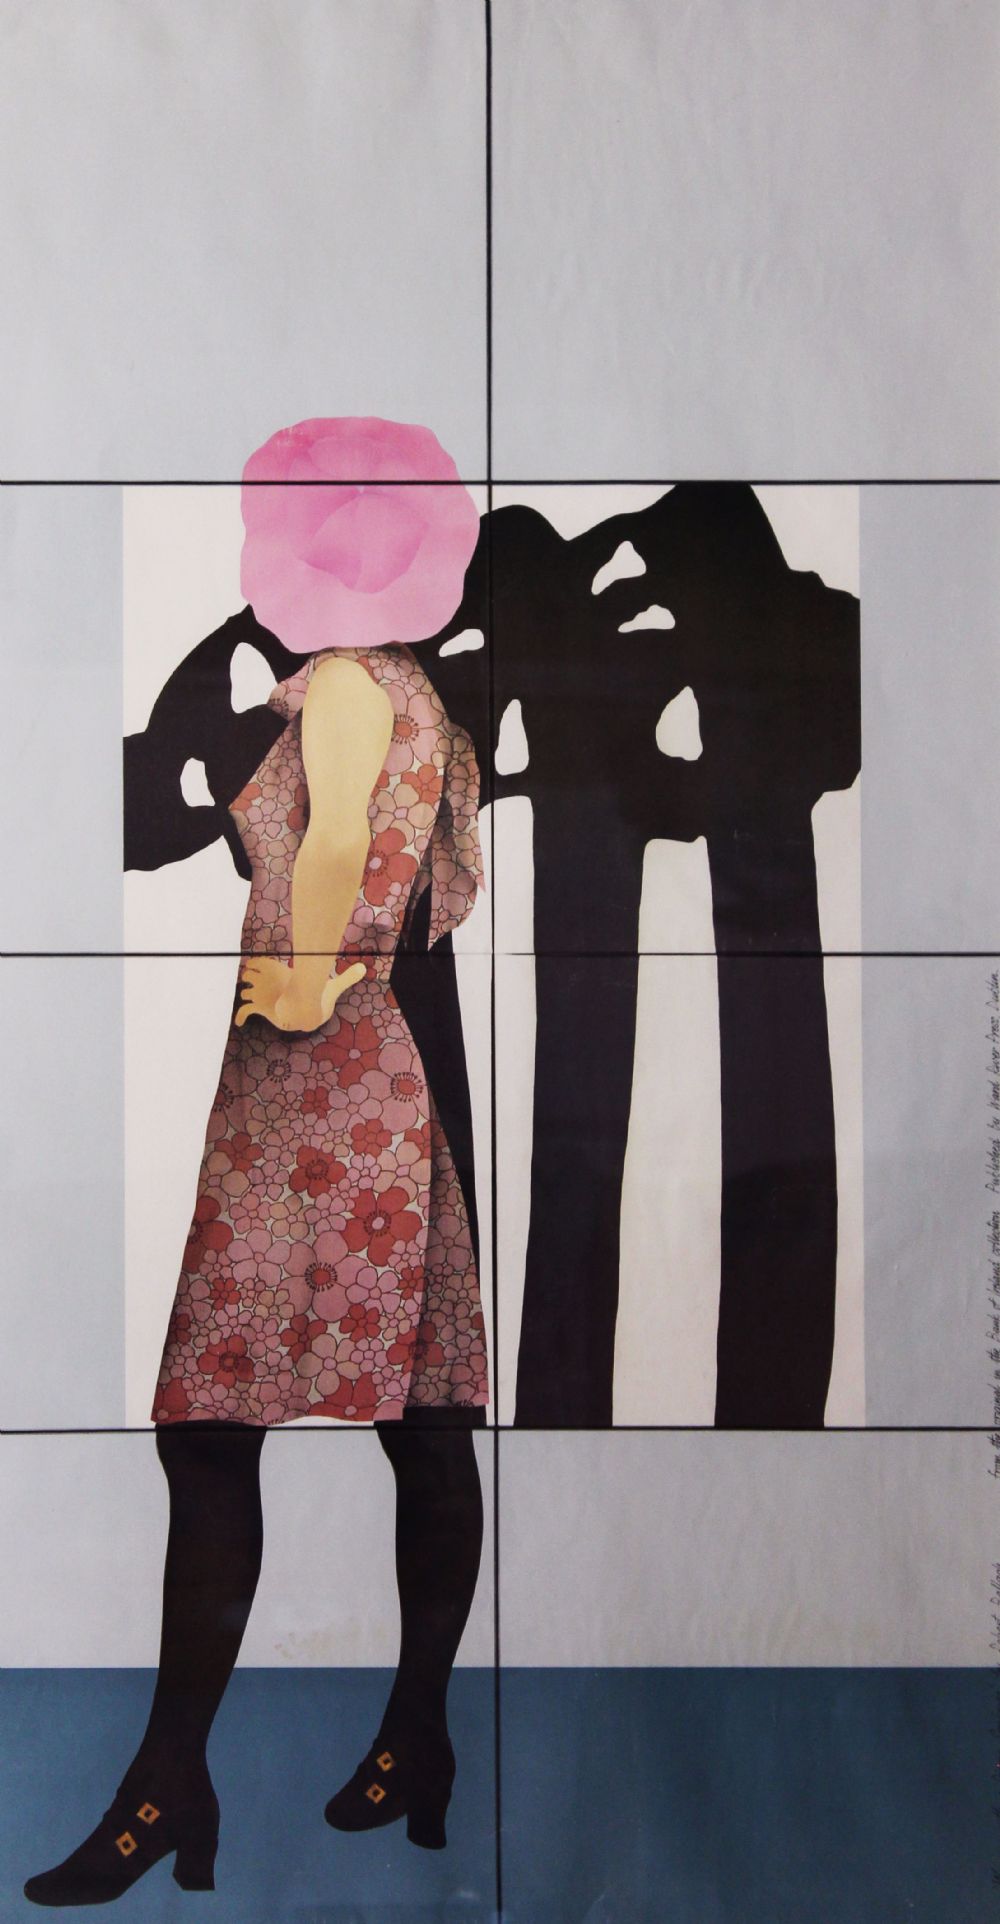 WOMAN WITH A PIERRE SOULAGES by Robert Ballagh  at deVeres Auctions